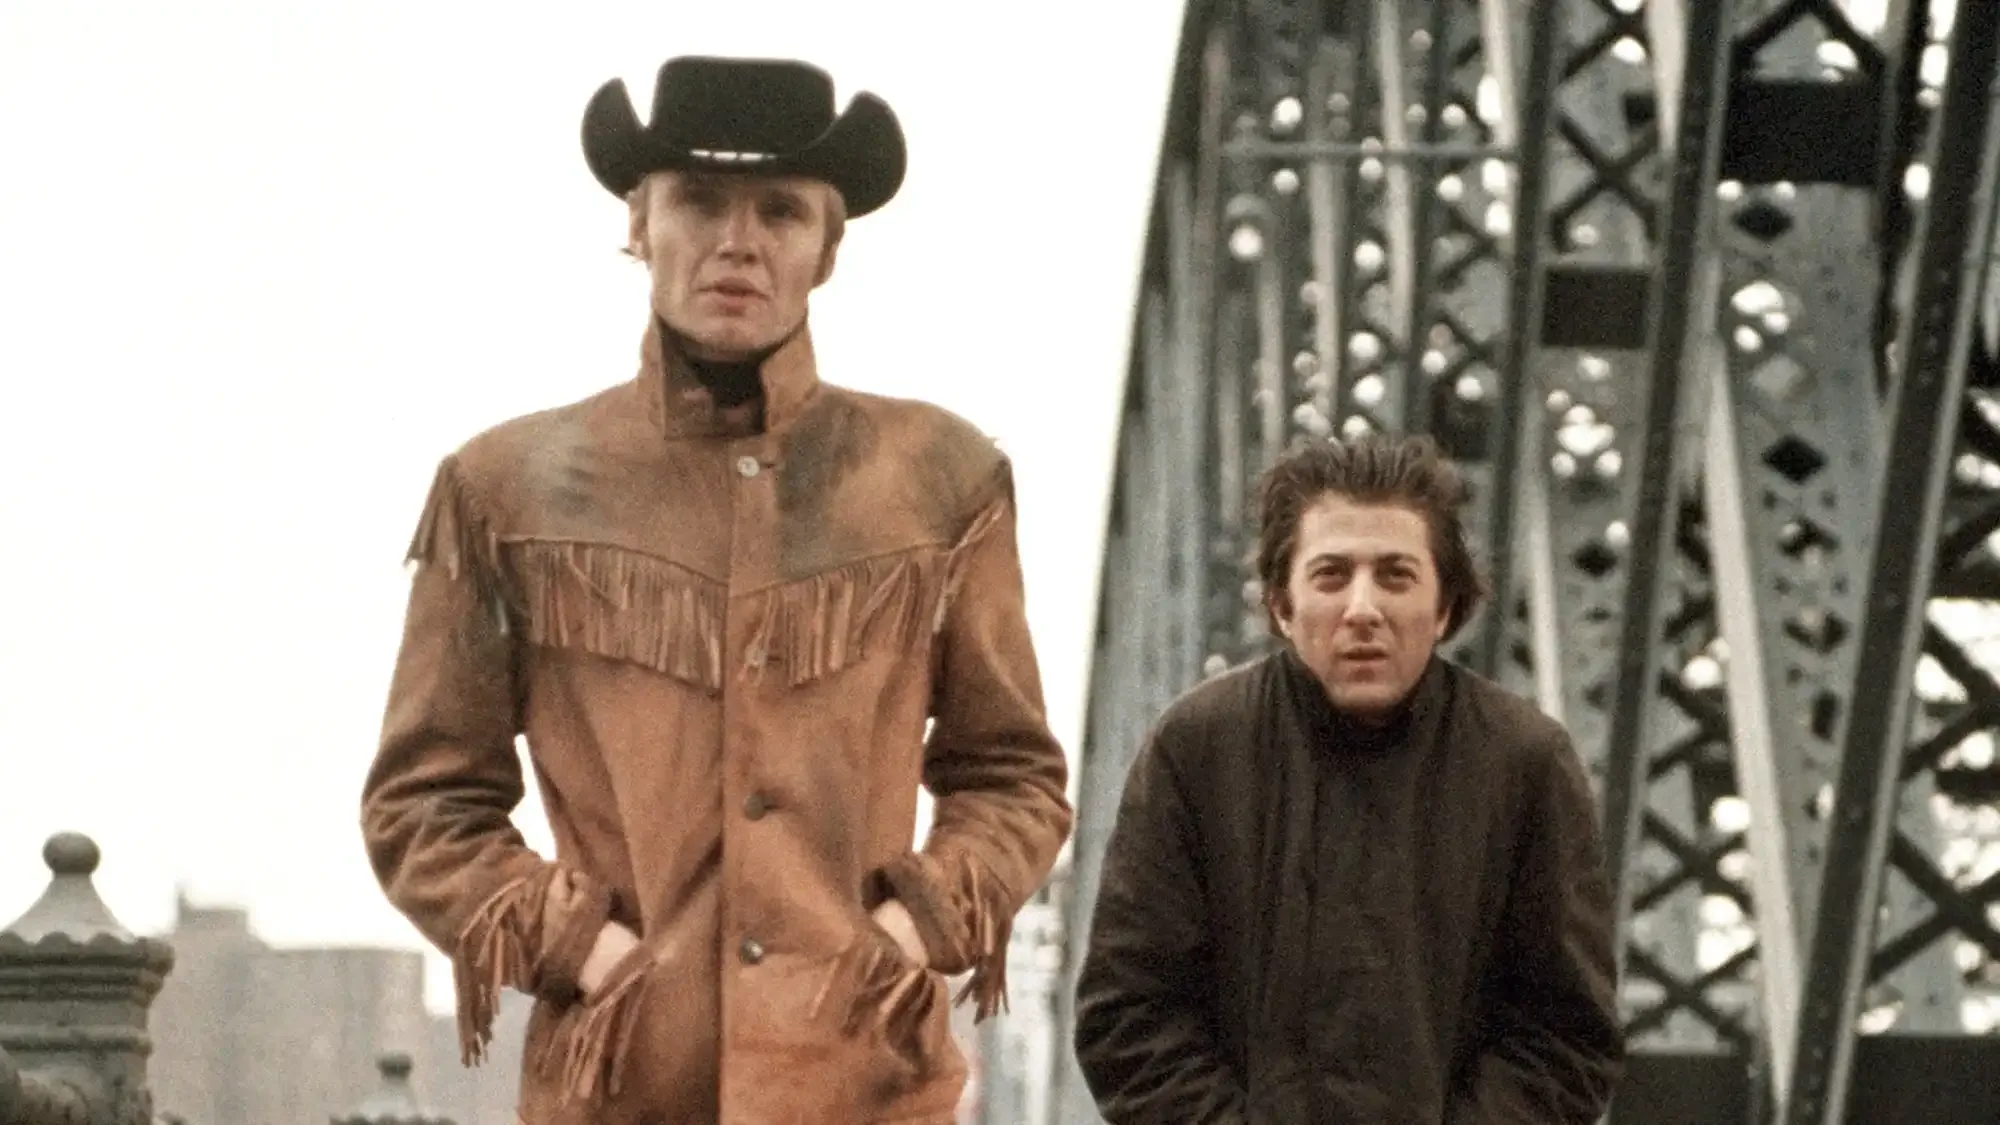 Midnight Cowboy movie review